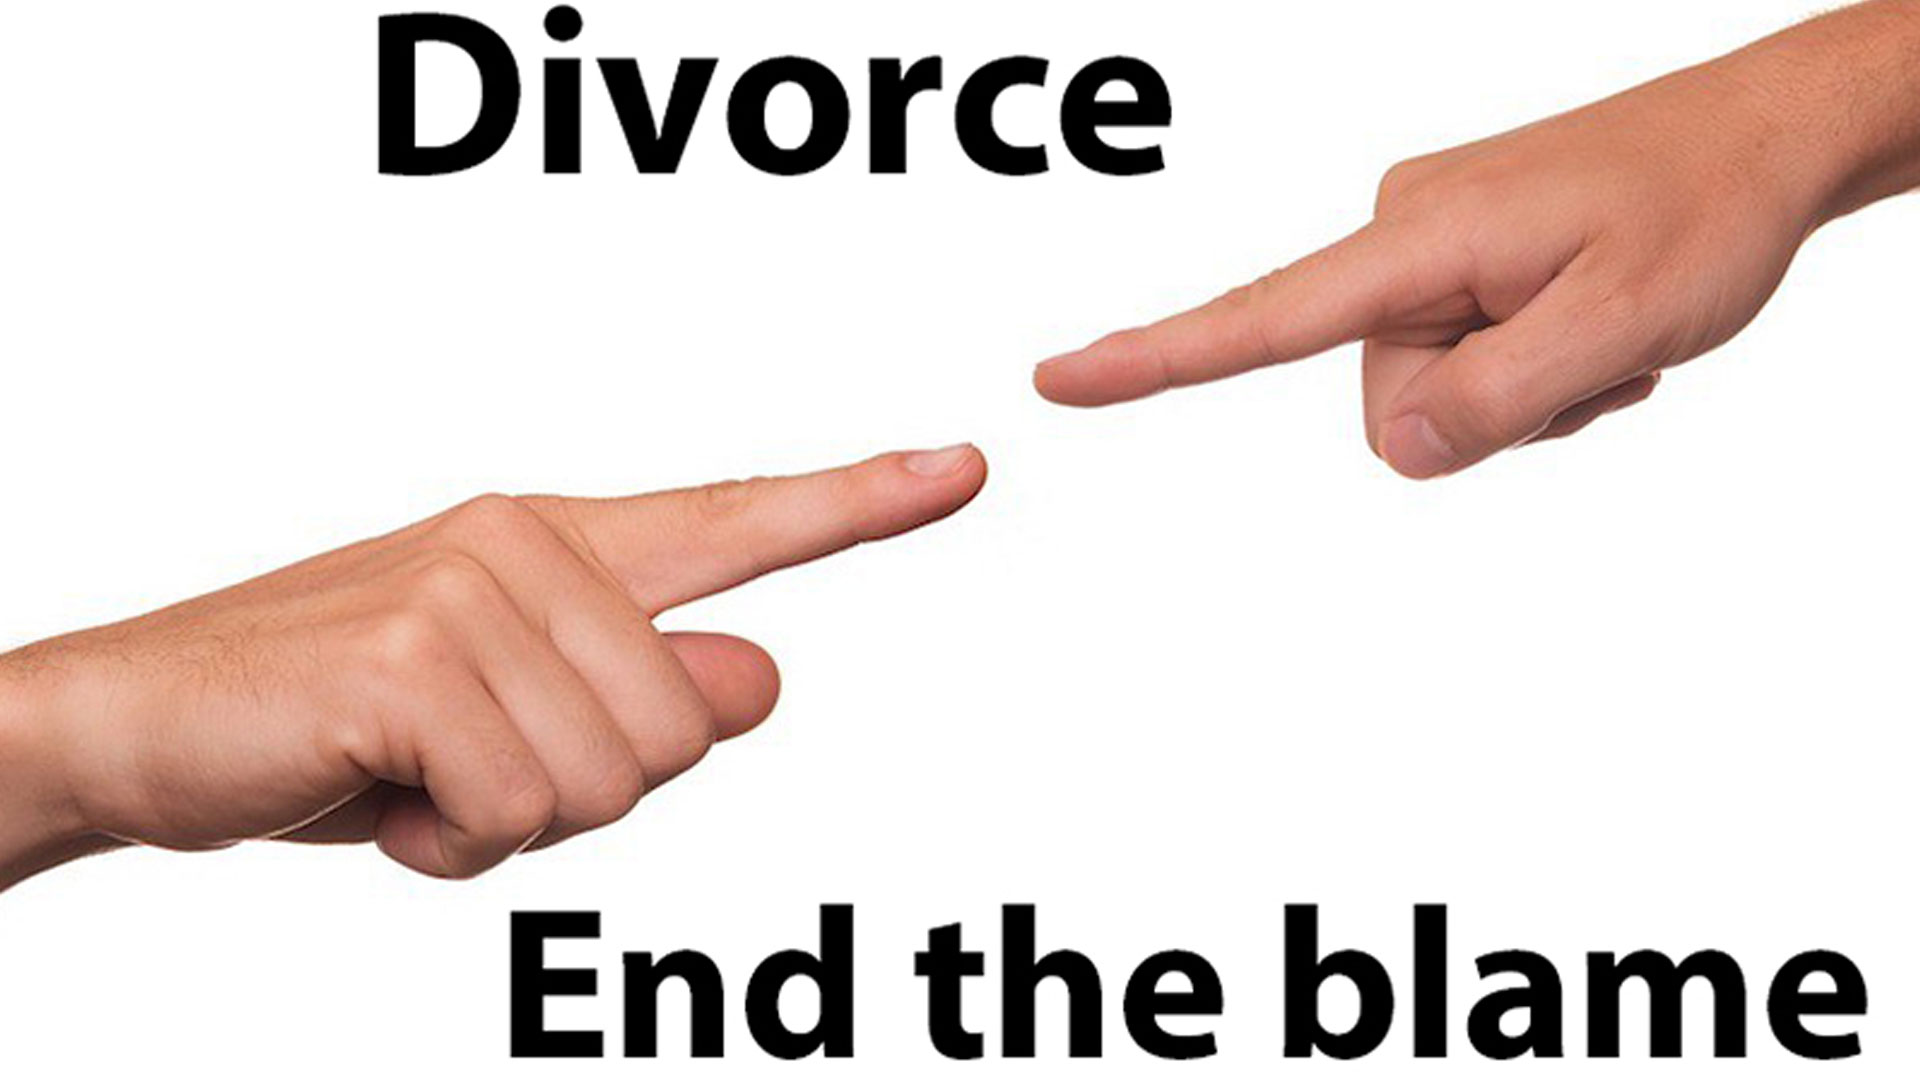 Latest divorce figures and why we must end blame game